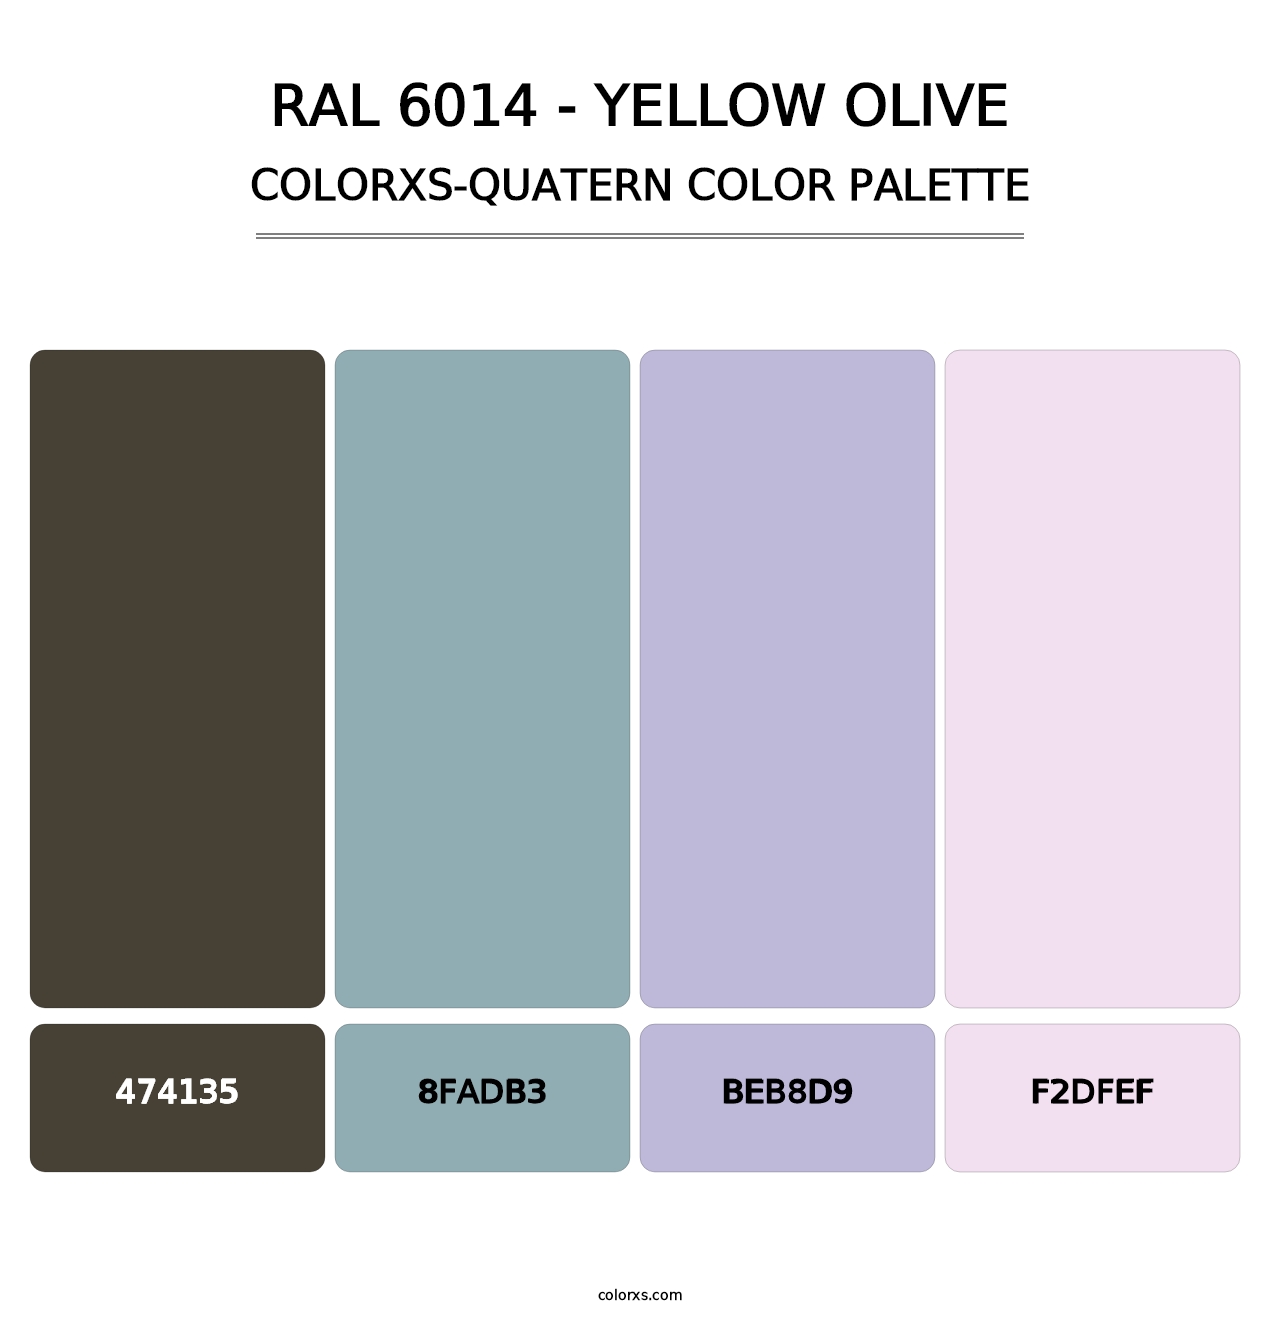 RAL 6014 - Yellow Olive - Colorxs Quatern Palette